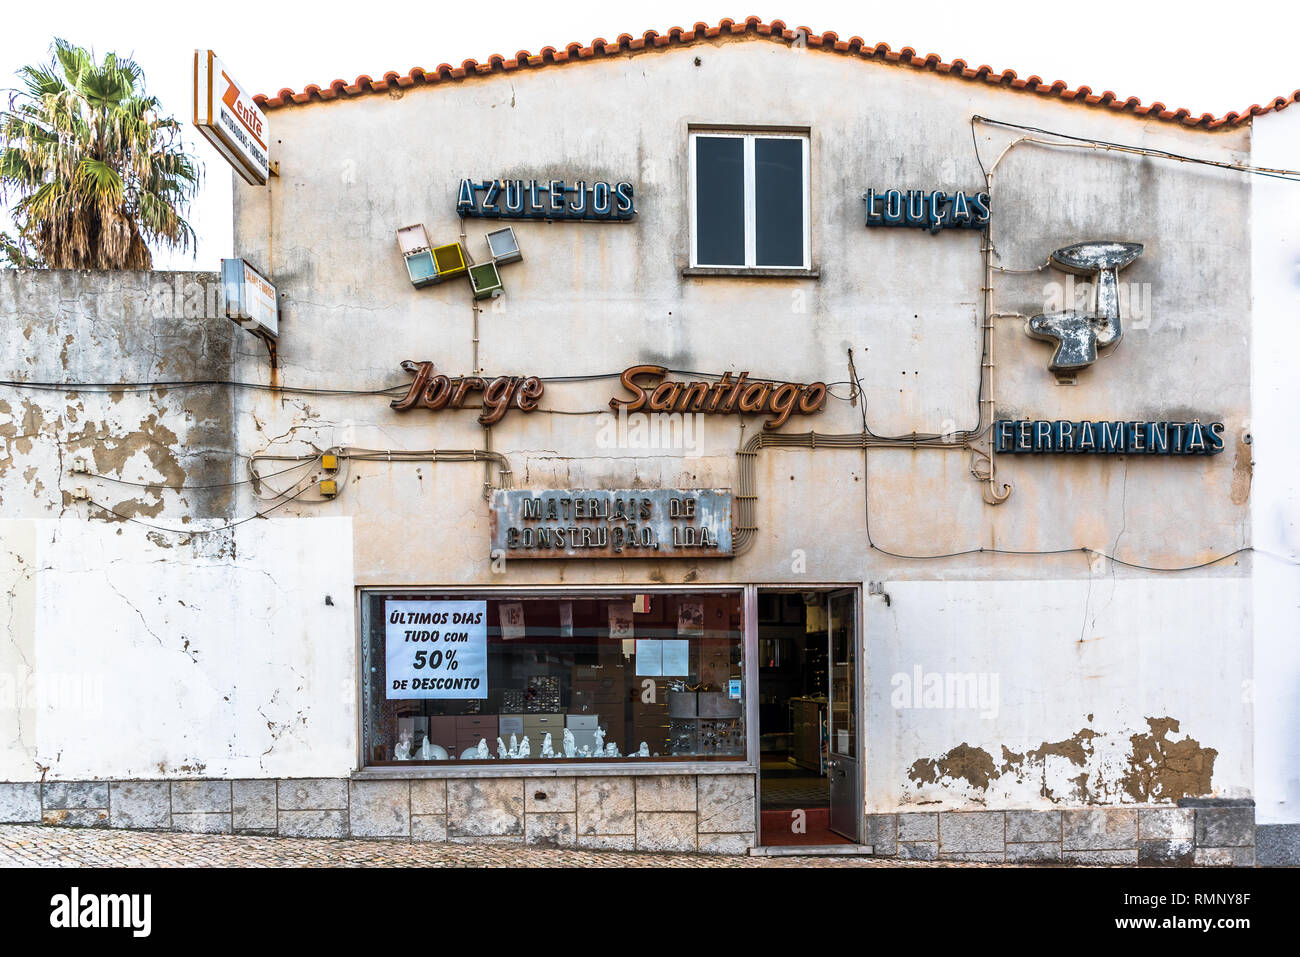 Cascais, Portugal - 6 December 2018: Hardware store front with multiple neon signs on facade advertising final days of closing-down sale in old town C Stock Photo